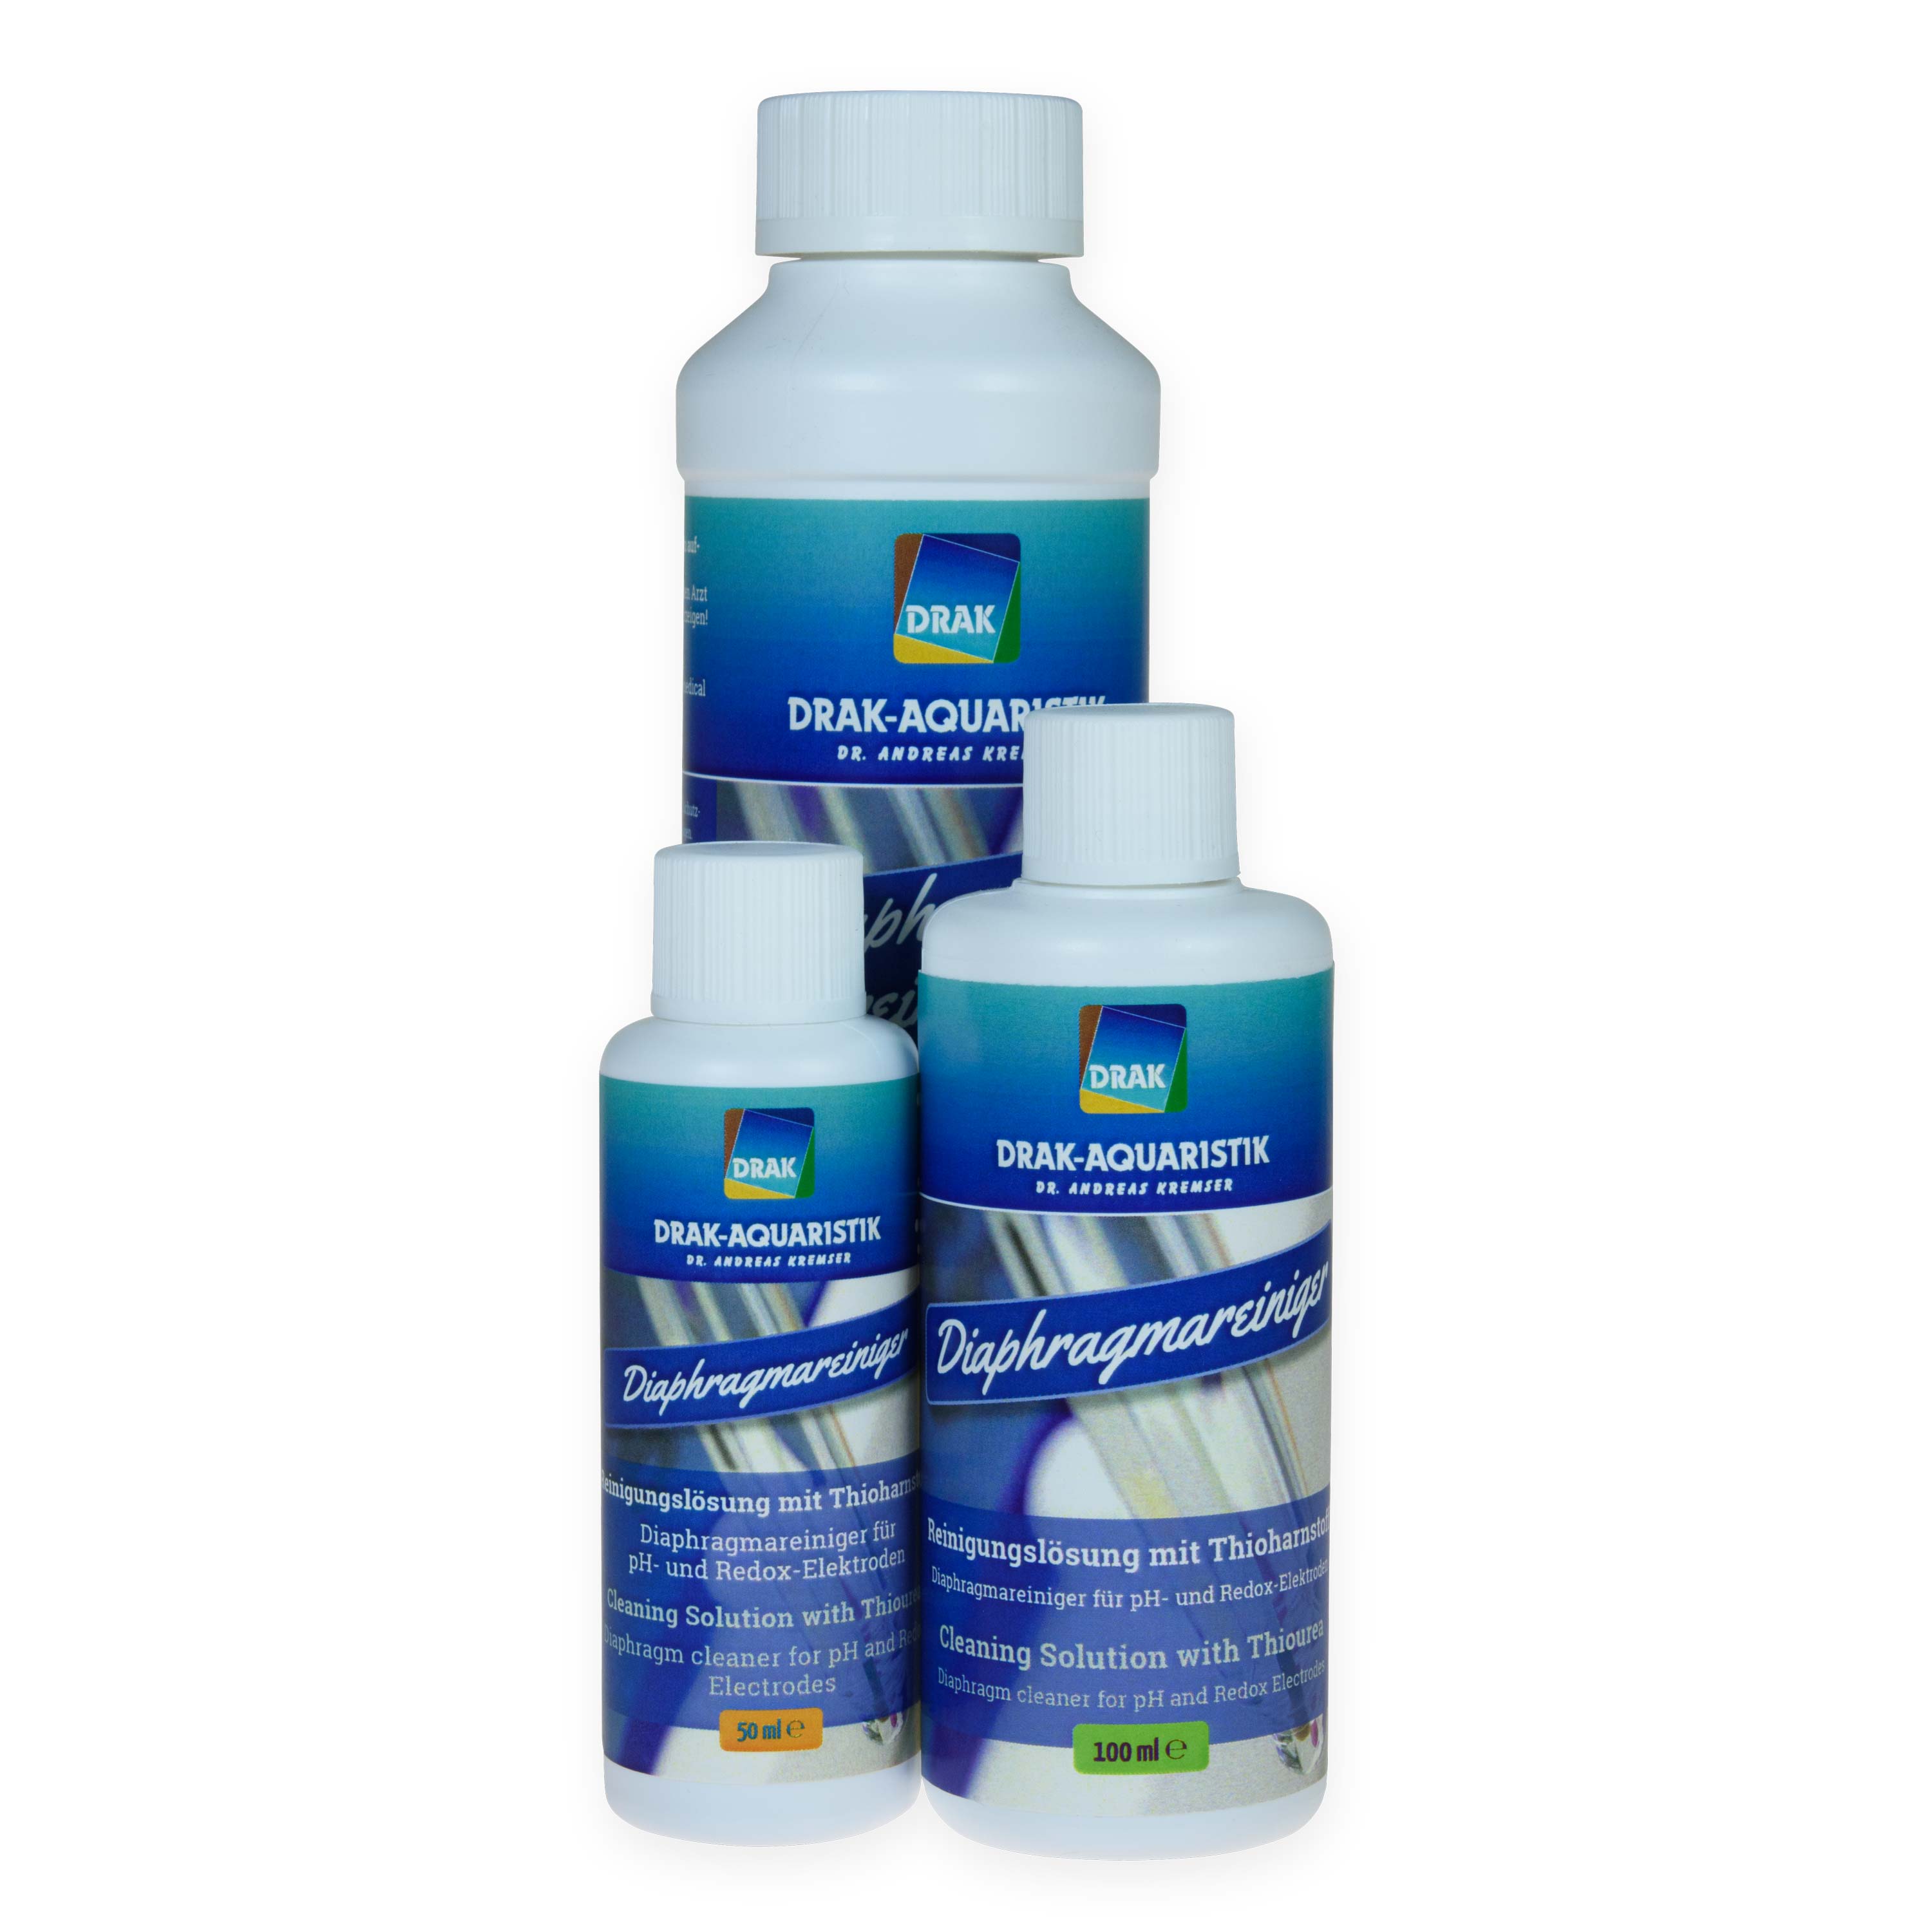 Diaphragm cleaner with thiourea bottles